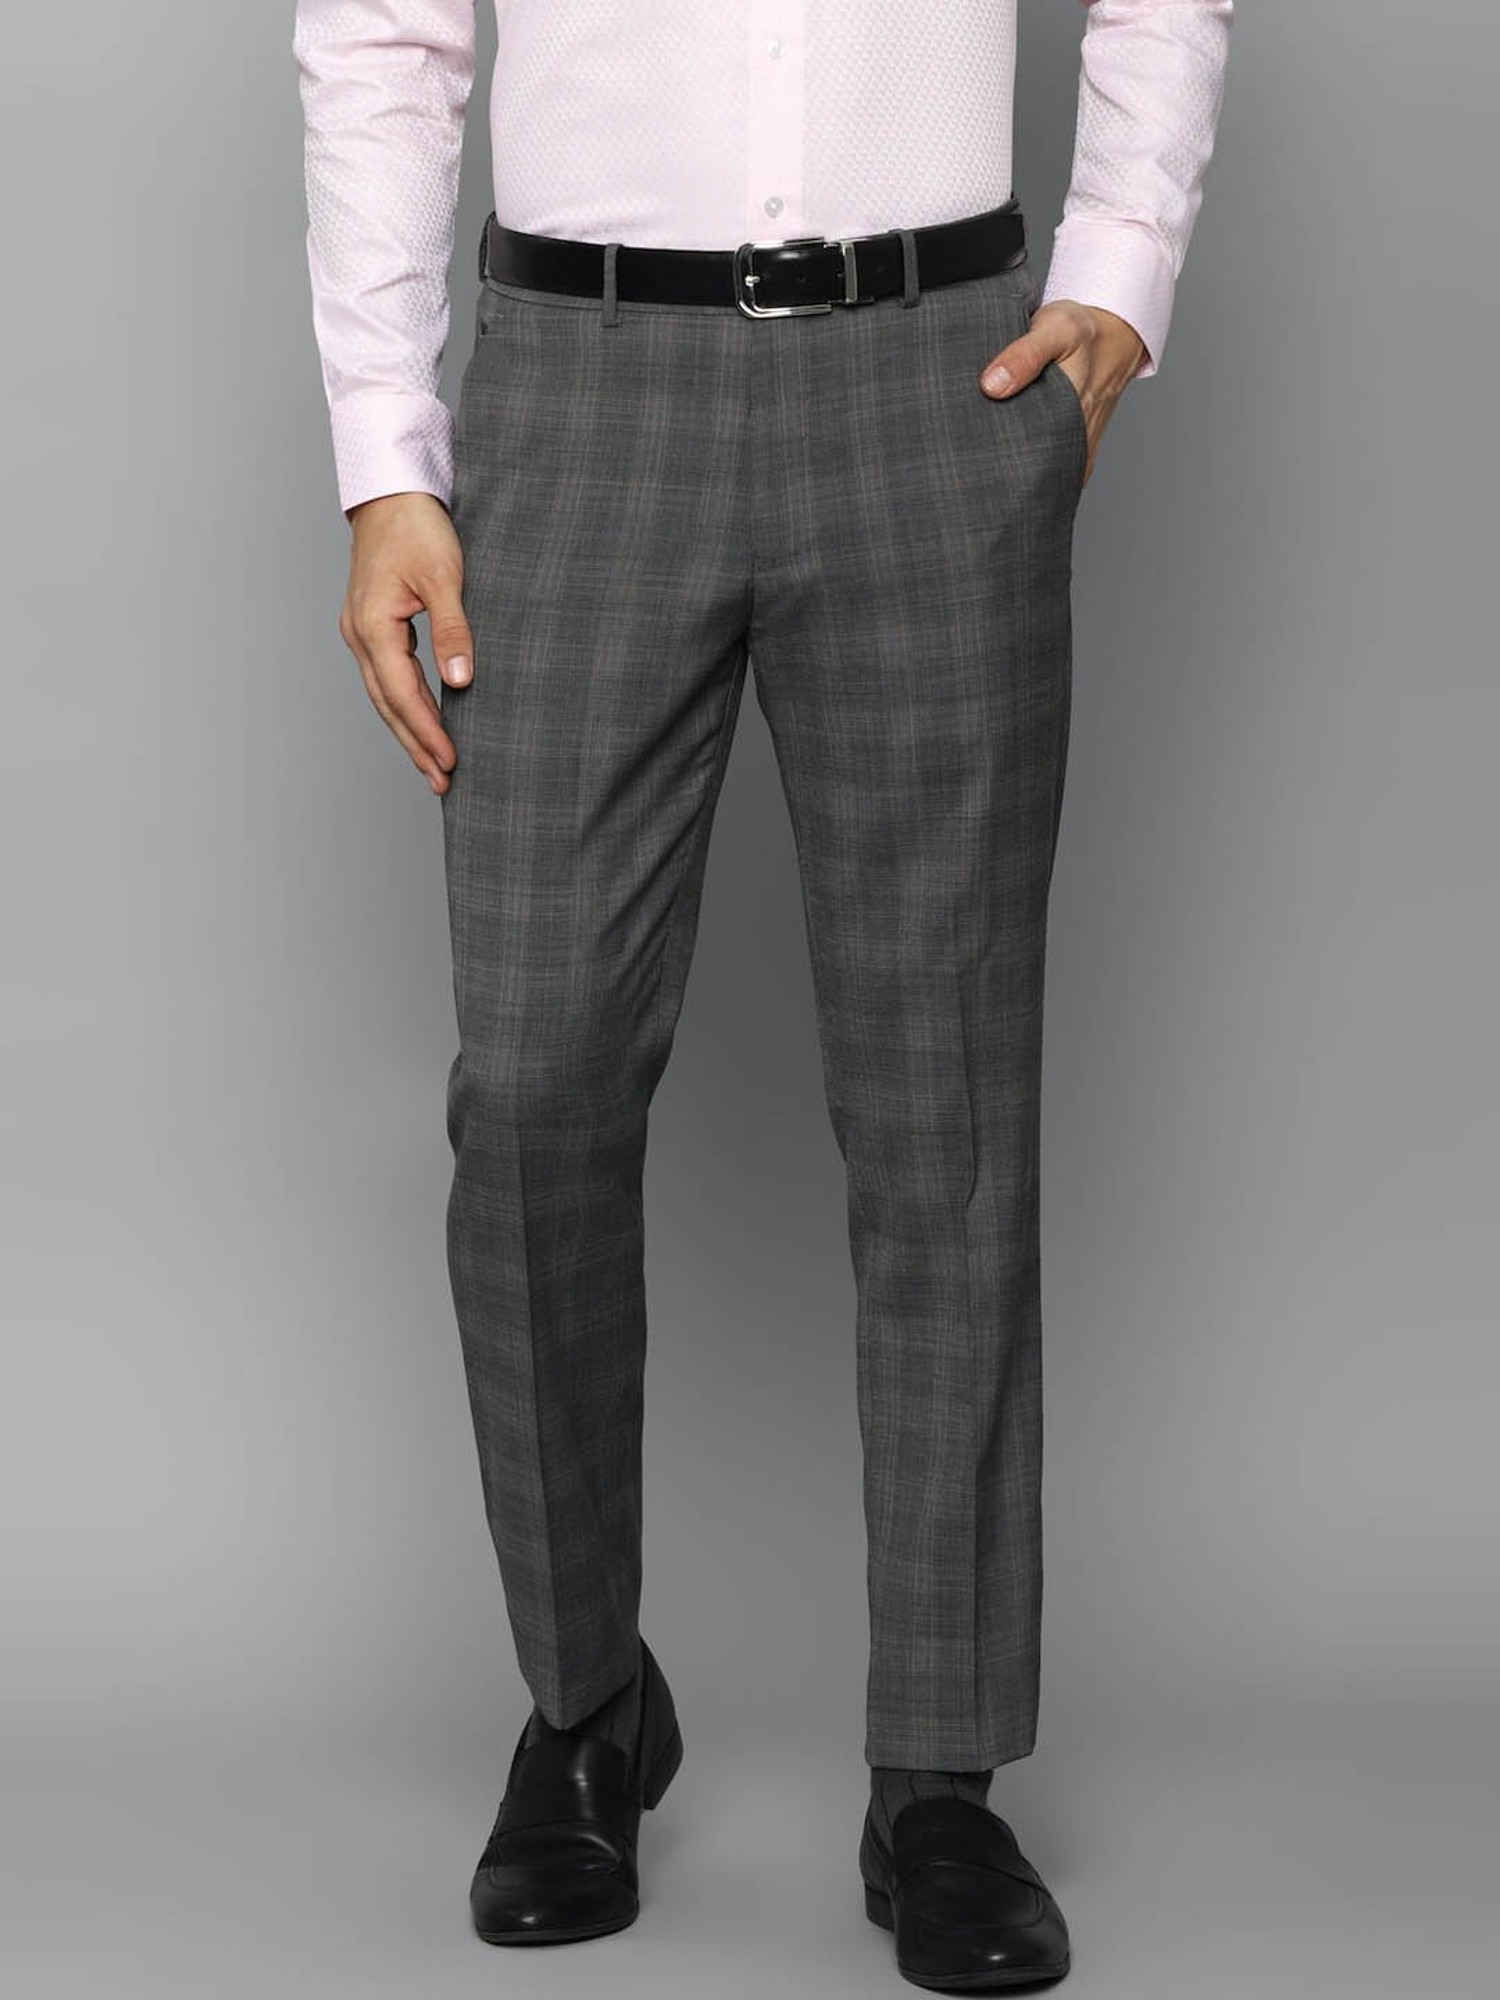 BOSS - Relaxed-fit pants in checked stretch cloth